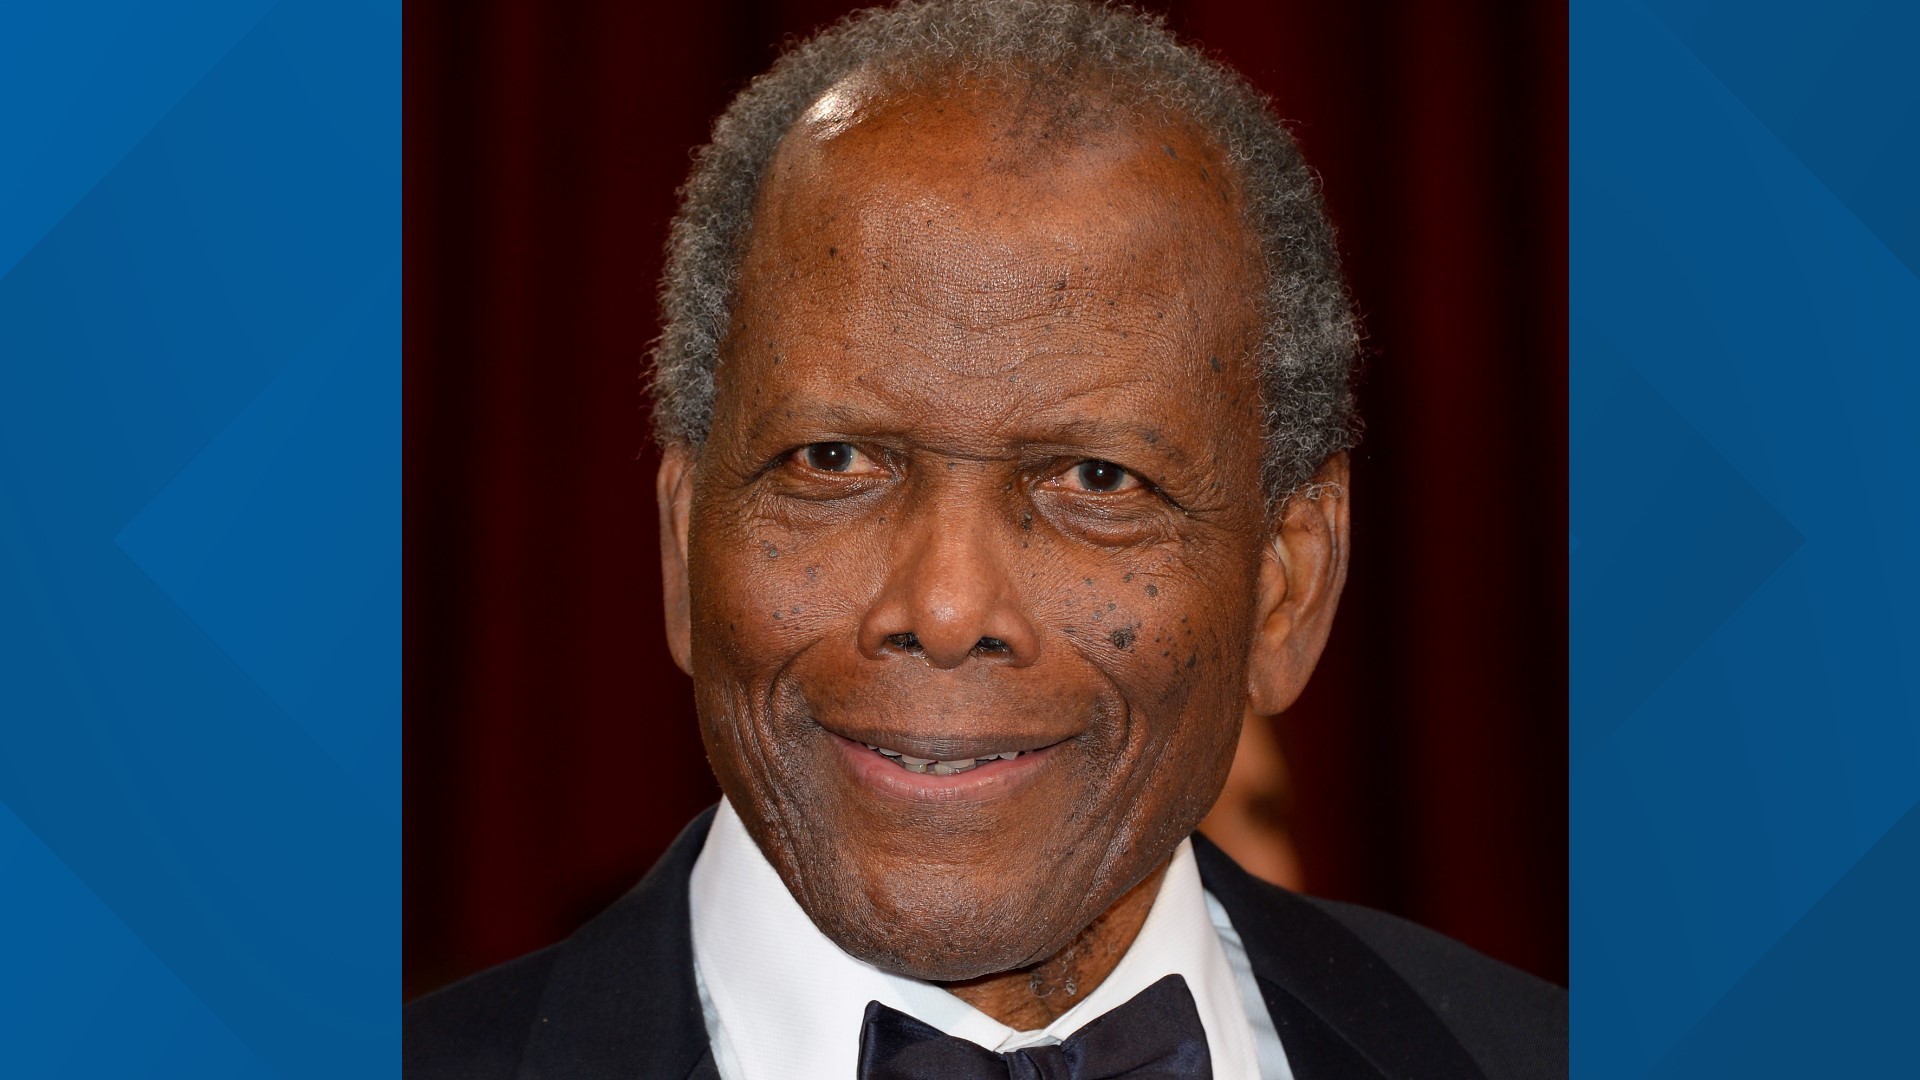 In 1964, Sidney Poitier made history when he won the Academy Award for Best Actor for "Lilies of the Field." The Mayor of DC paid respect to his legacy.